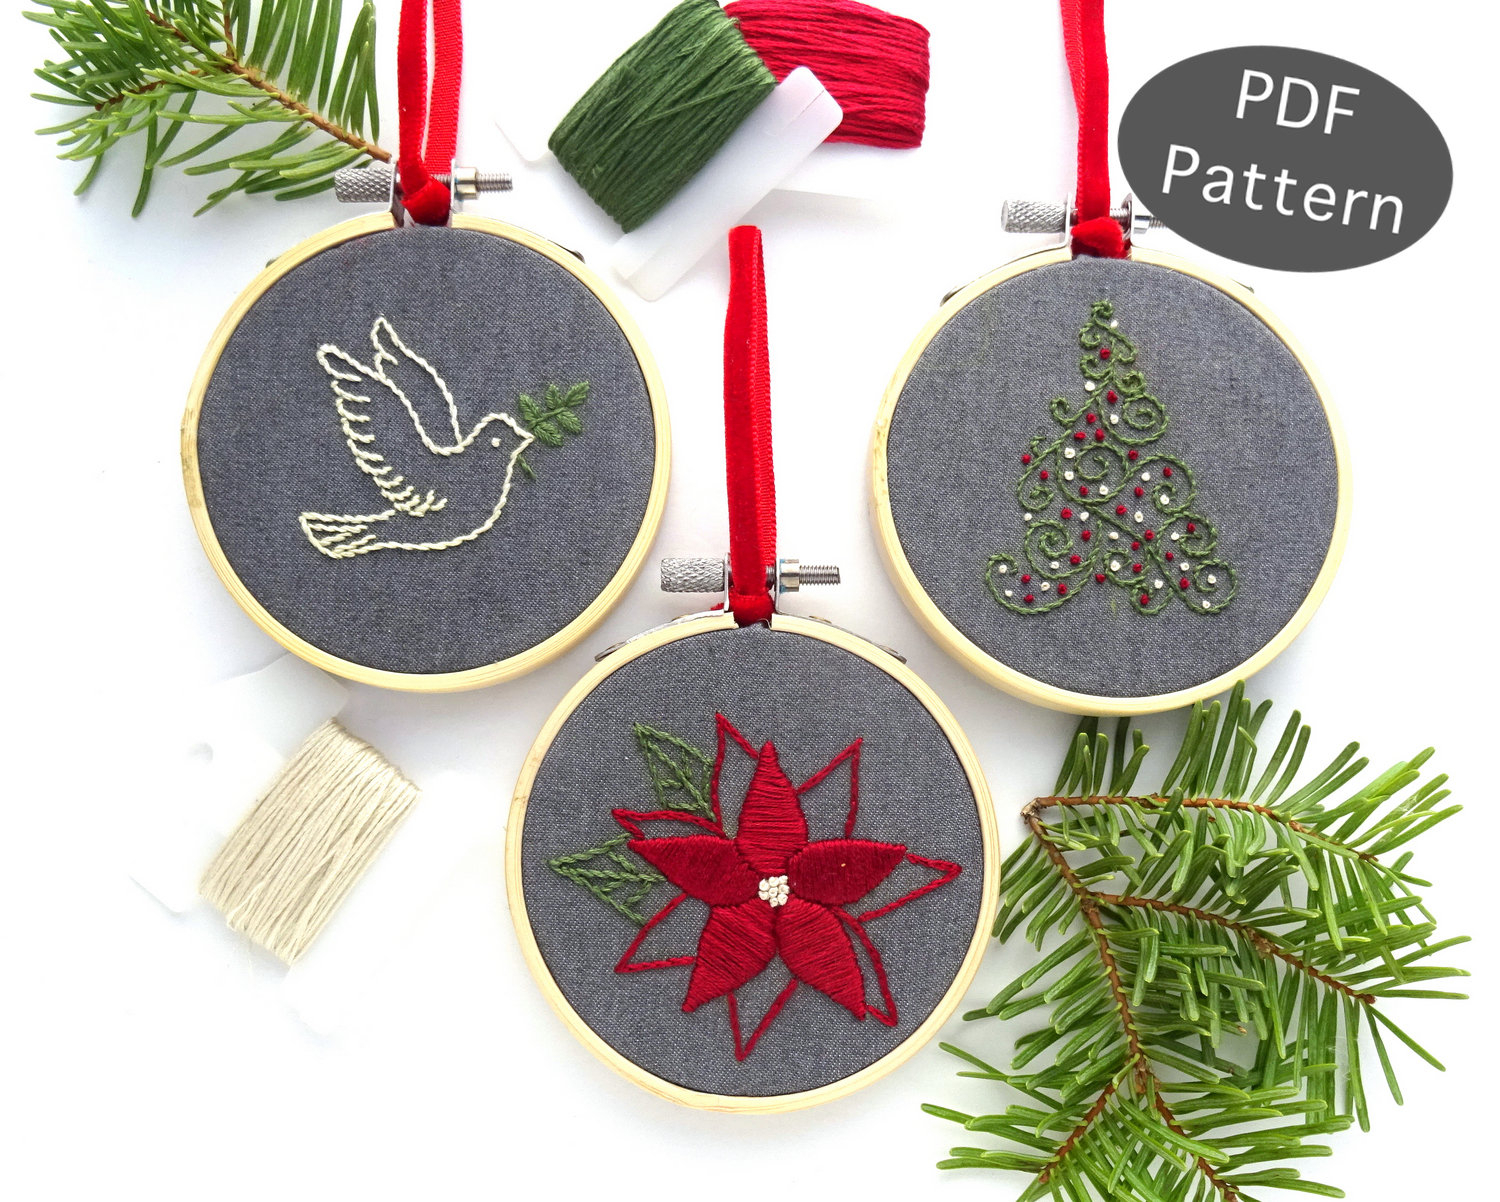 Embroidery Christmas Patterns Christmas Ornament Set Hand Embroidery Pattern Diy Holiday Ornament Christmas Gift Idea Beginner Embroidery Pdf Peace Dove Ornament